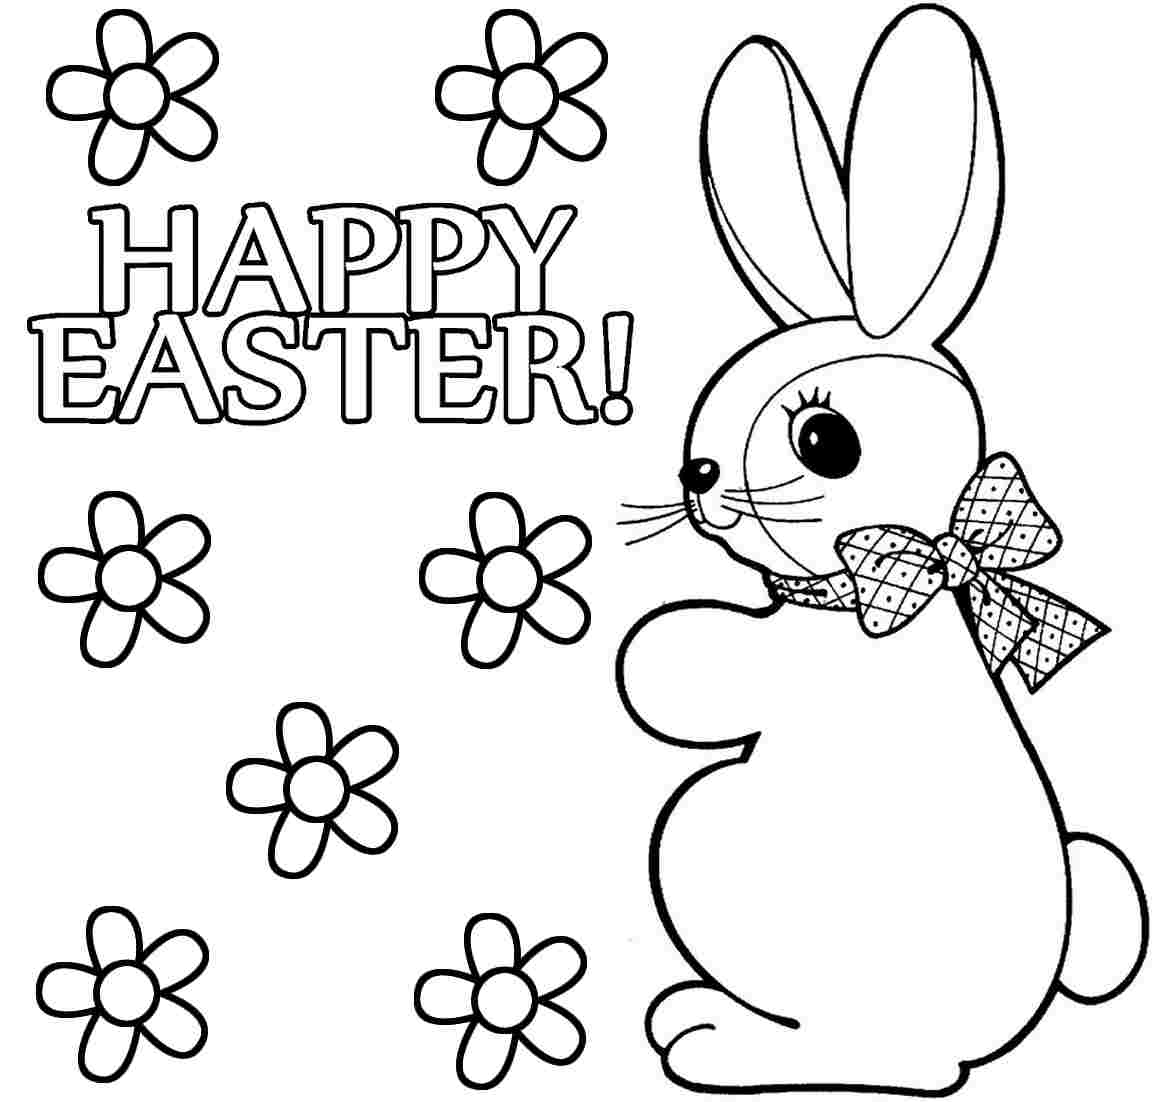 Easter bunny coloring pages to print to download and print